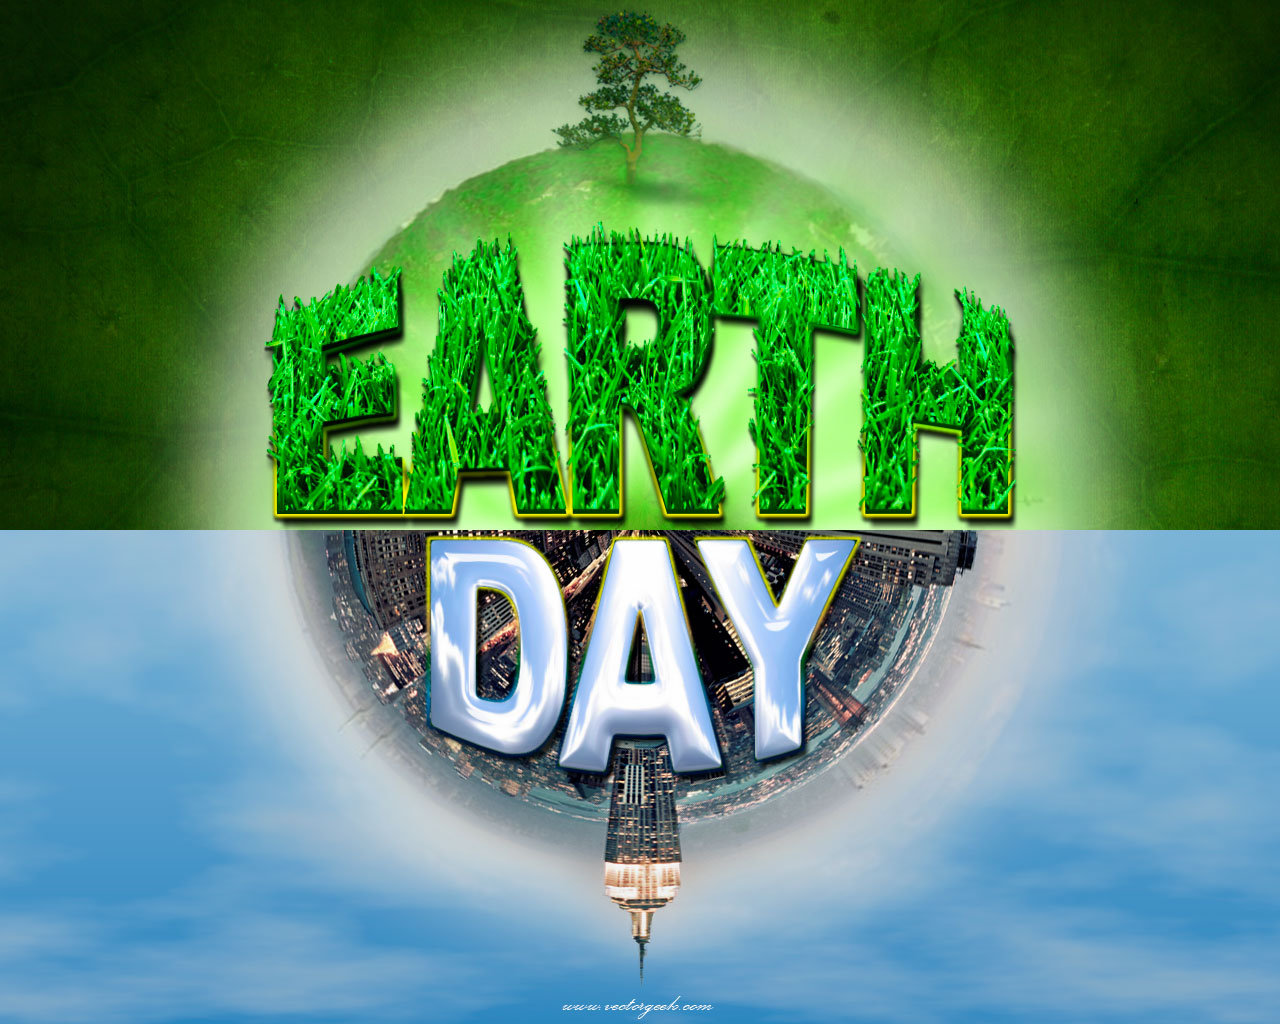 earthday_wallpapers_quotes_images_gogreen_environmental(www.fun-gall.blogspot.com)_07